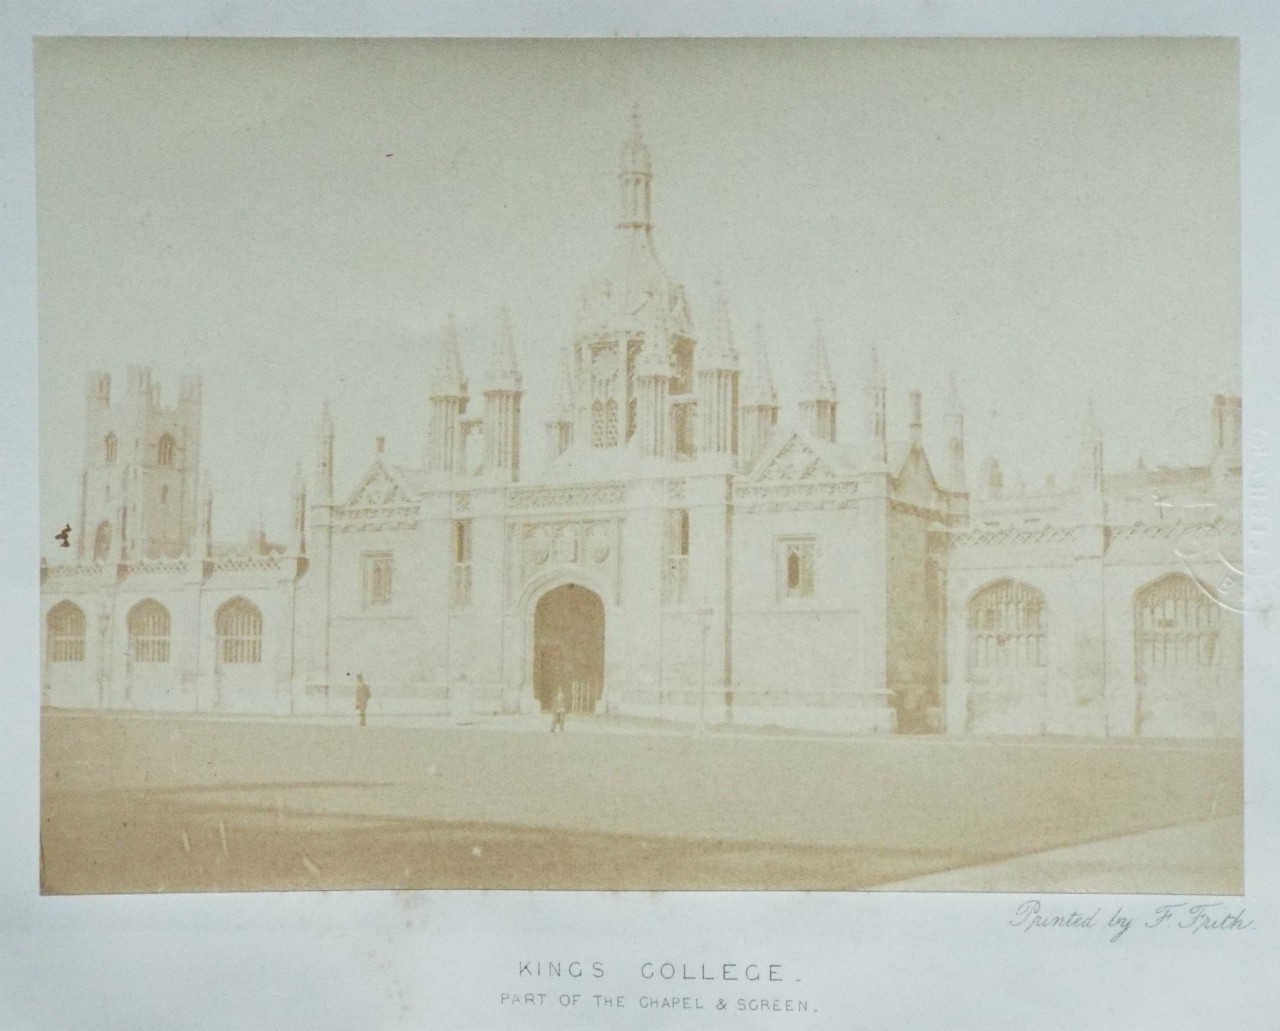 Photograph - King's College - Part of the Chapel & Screen.